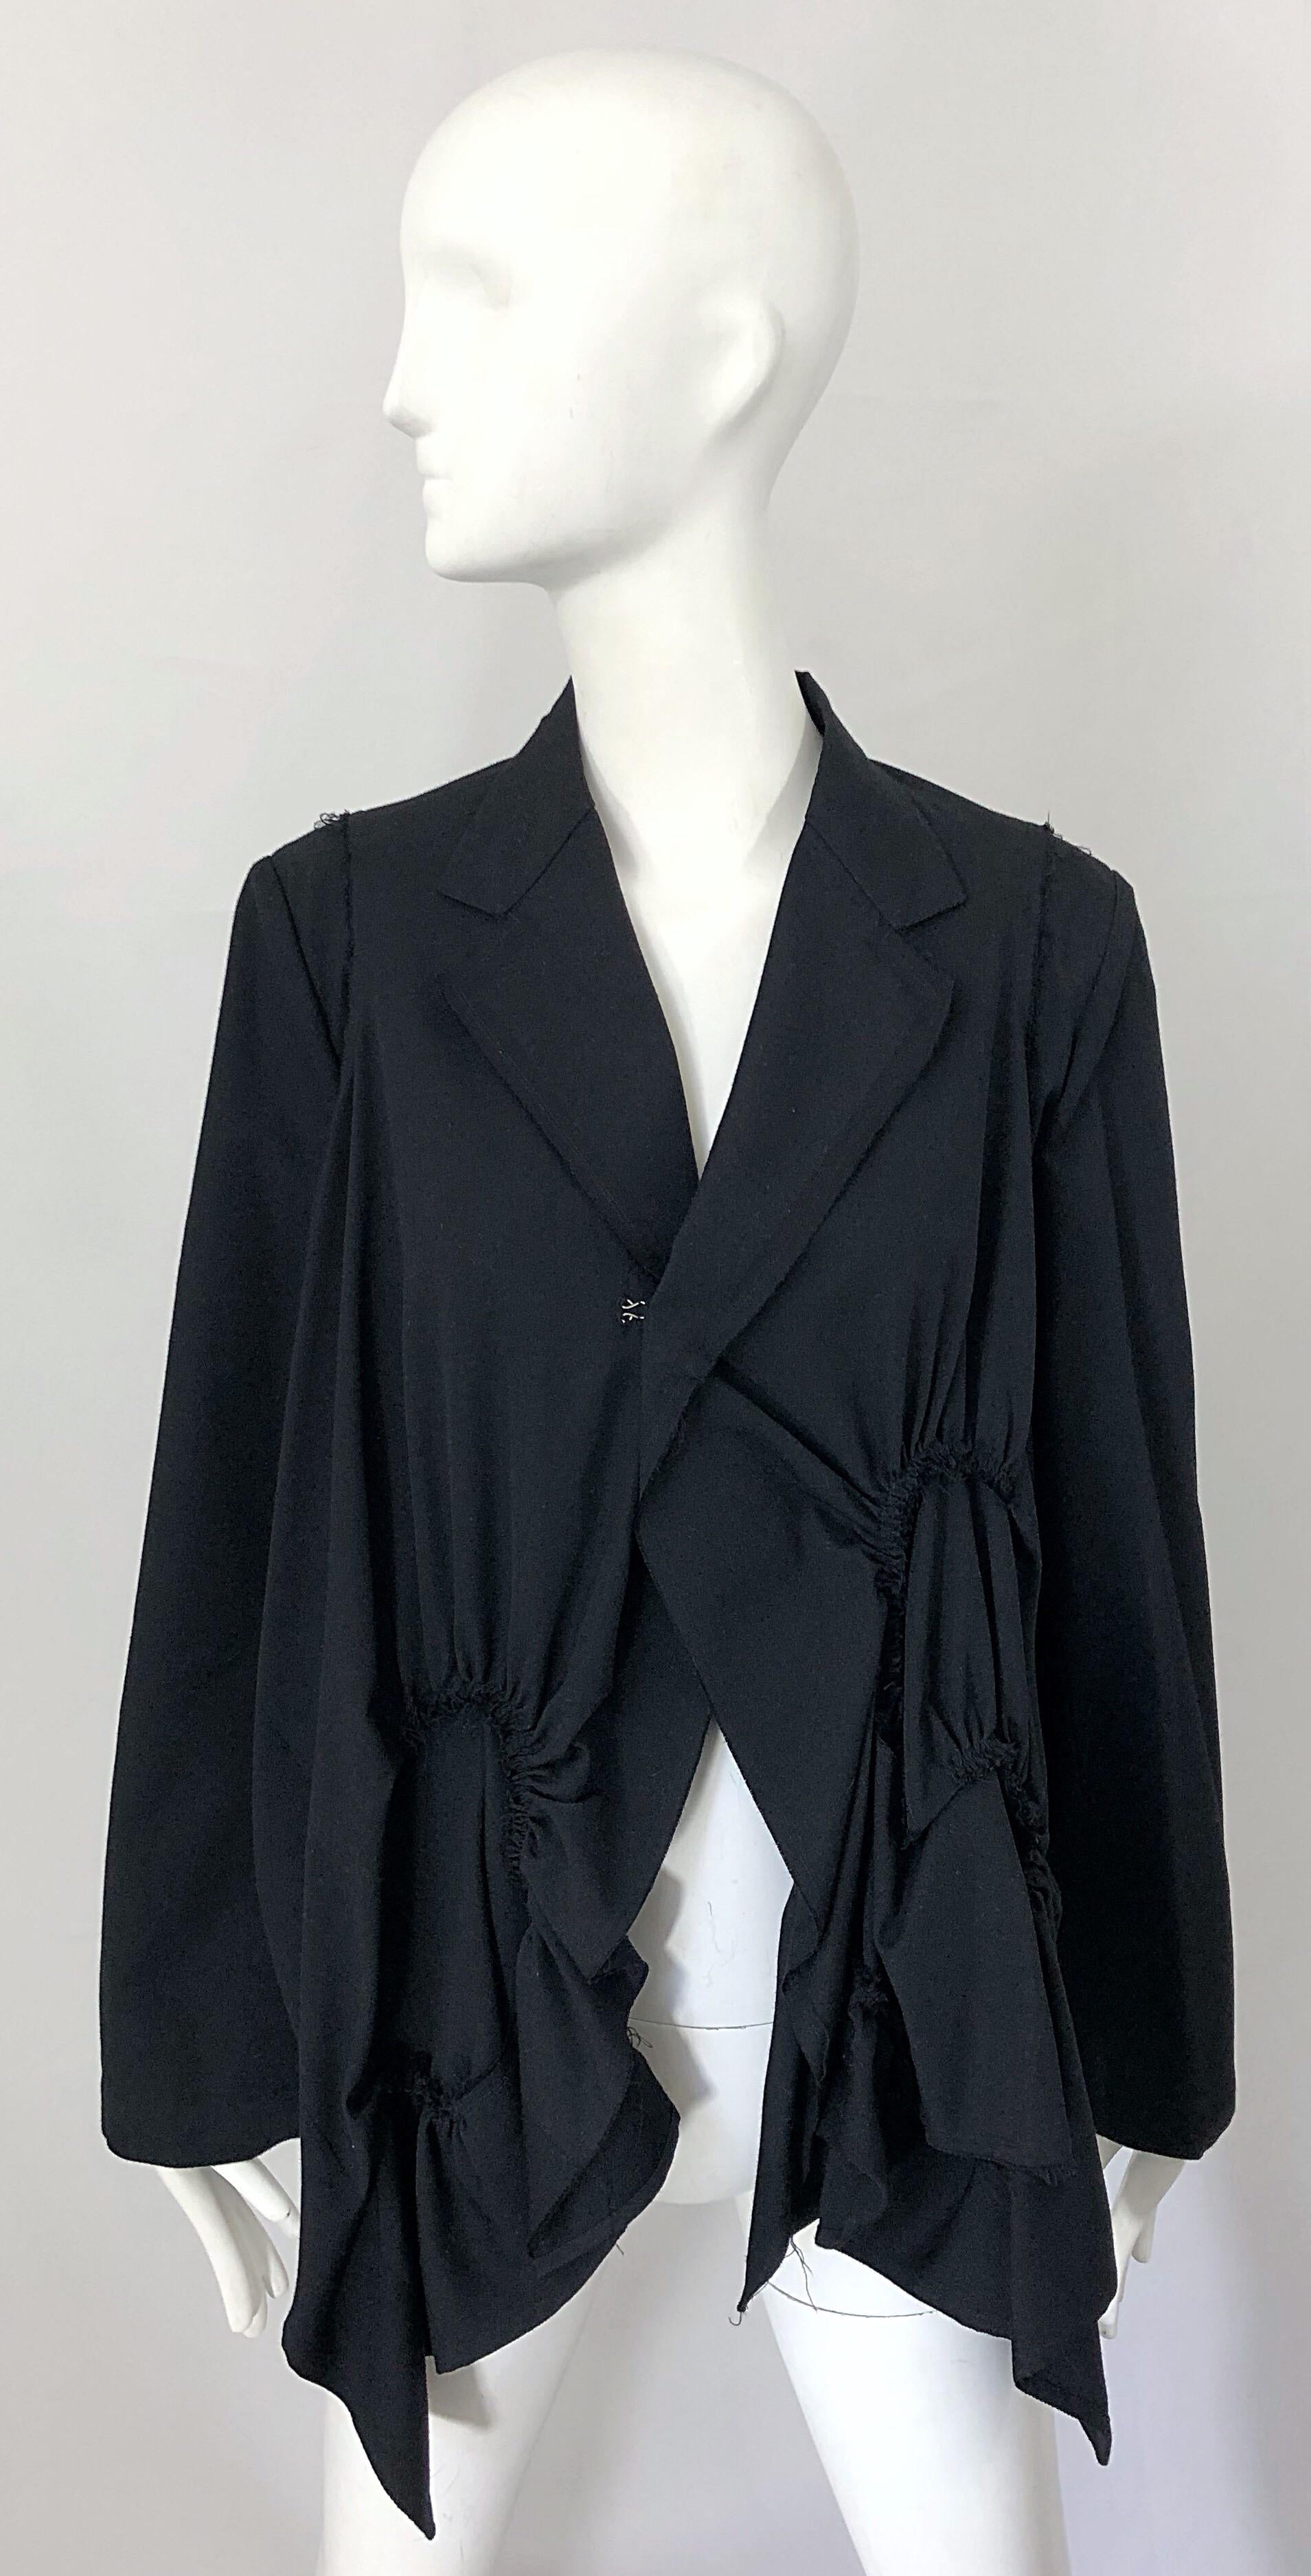 Awesome mid 90s COMME DES GARCONS black vintage Avant Garde trapeze swing jacket! There was so much work and thought put into every detail of this rare gem. Features a single large hook-and-eye closure on the front. Cropped asymmetric back features